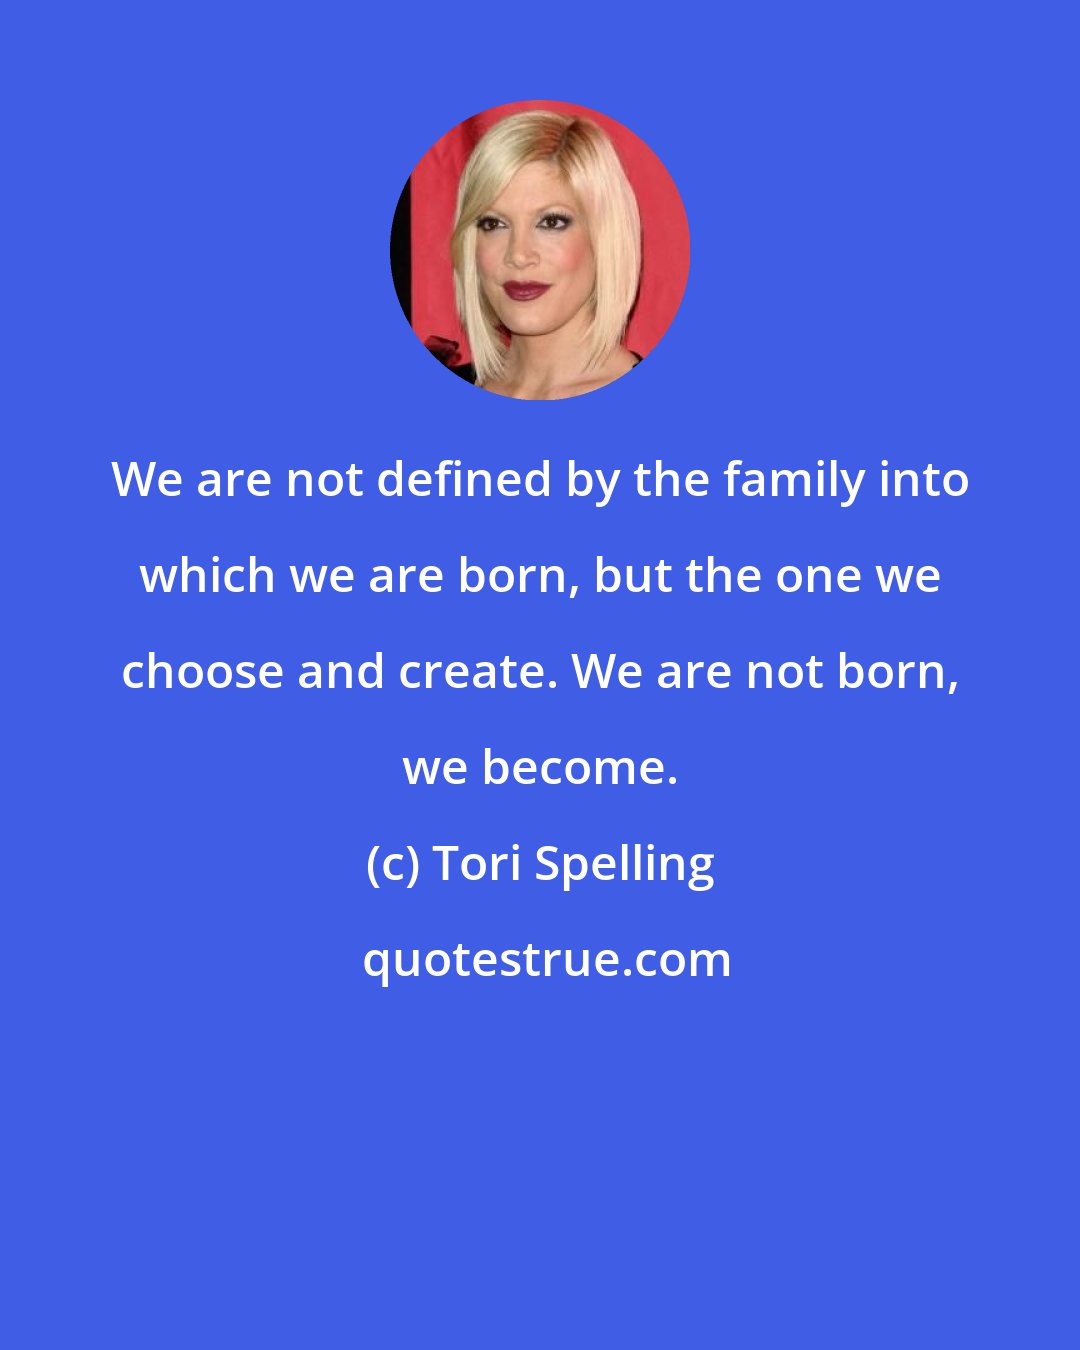 Tori Spelling: We are not defined by the family into which we are born, but the one we choose and create. We are not born, we become.